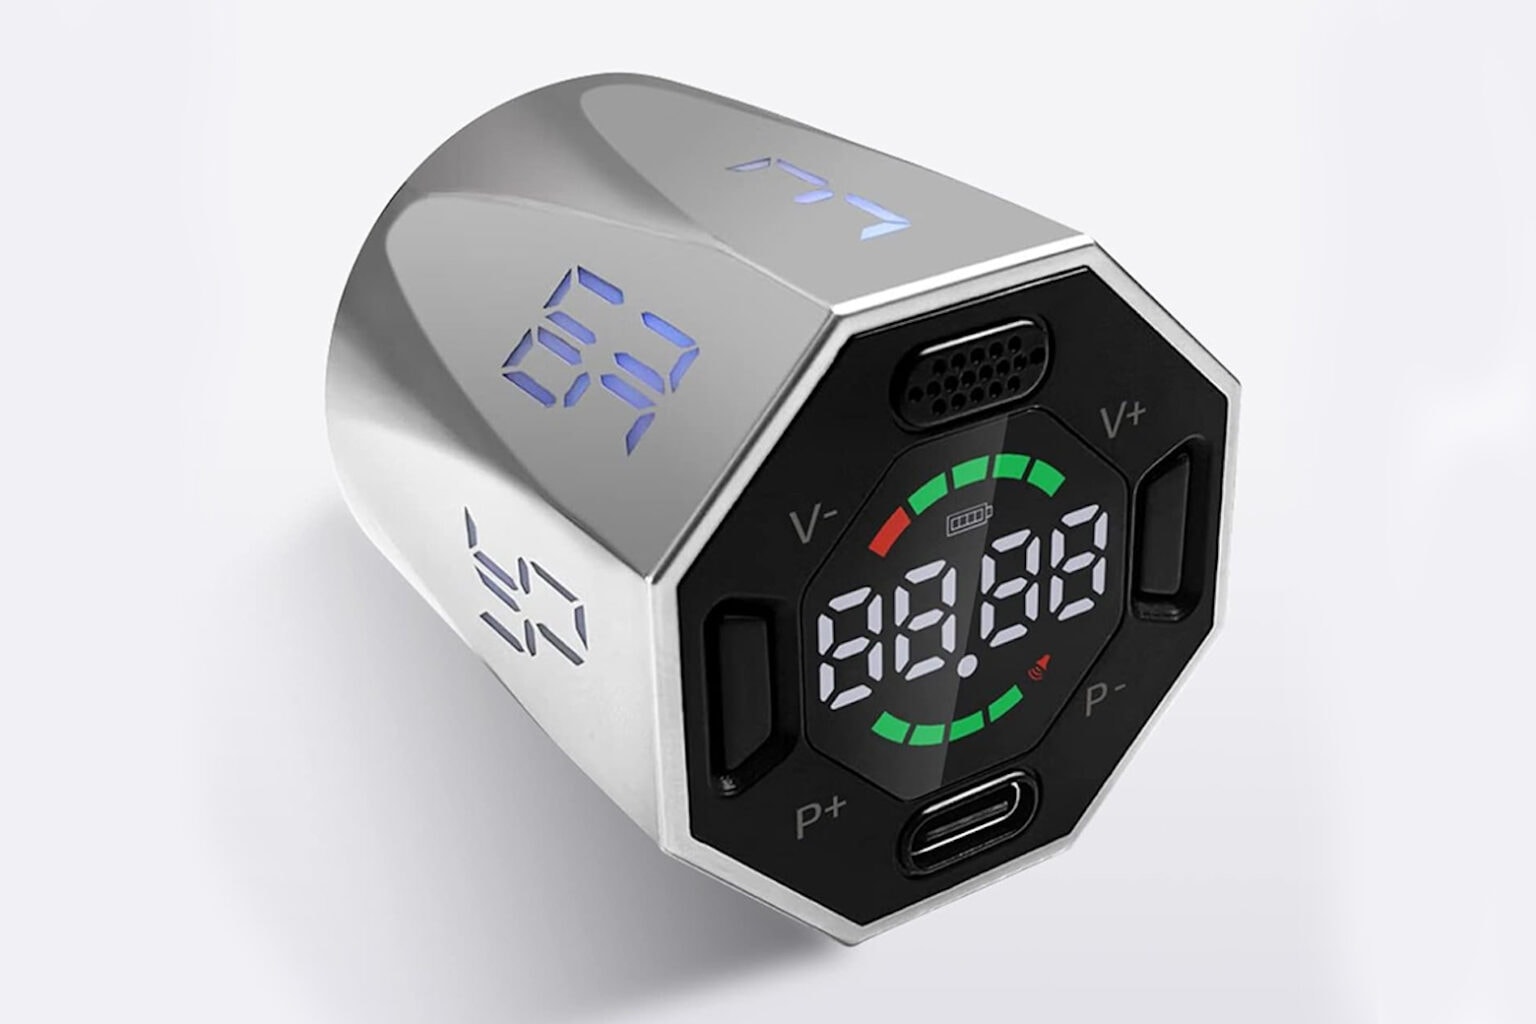 Set your time with this magnetic productivity timer that's flippable, now $24.99.